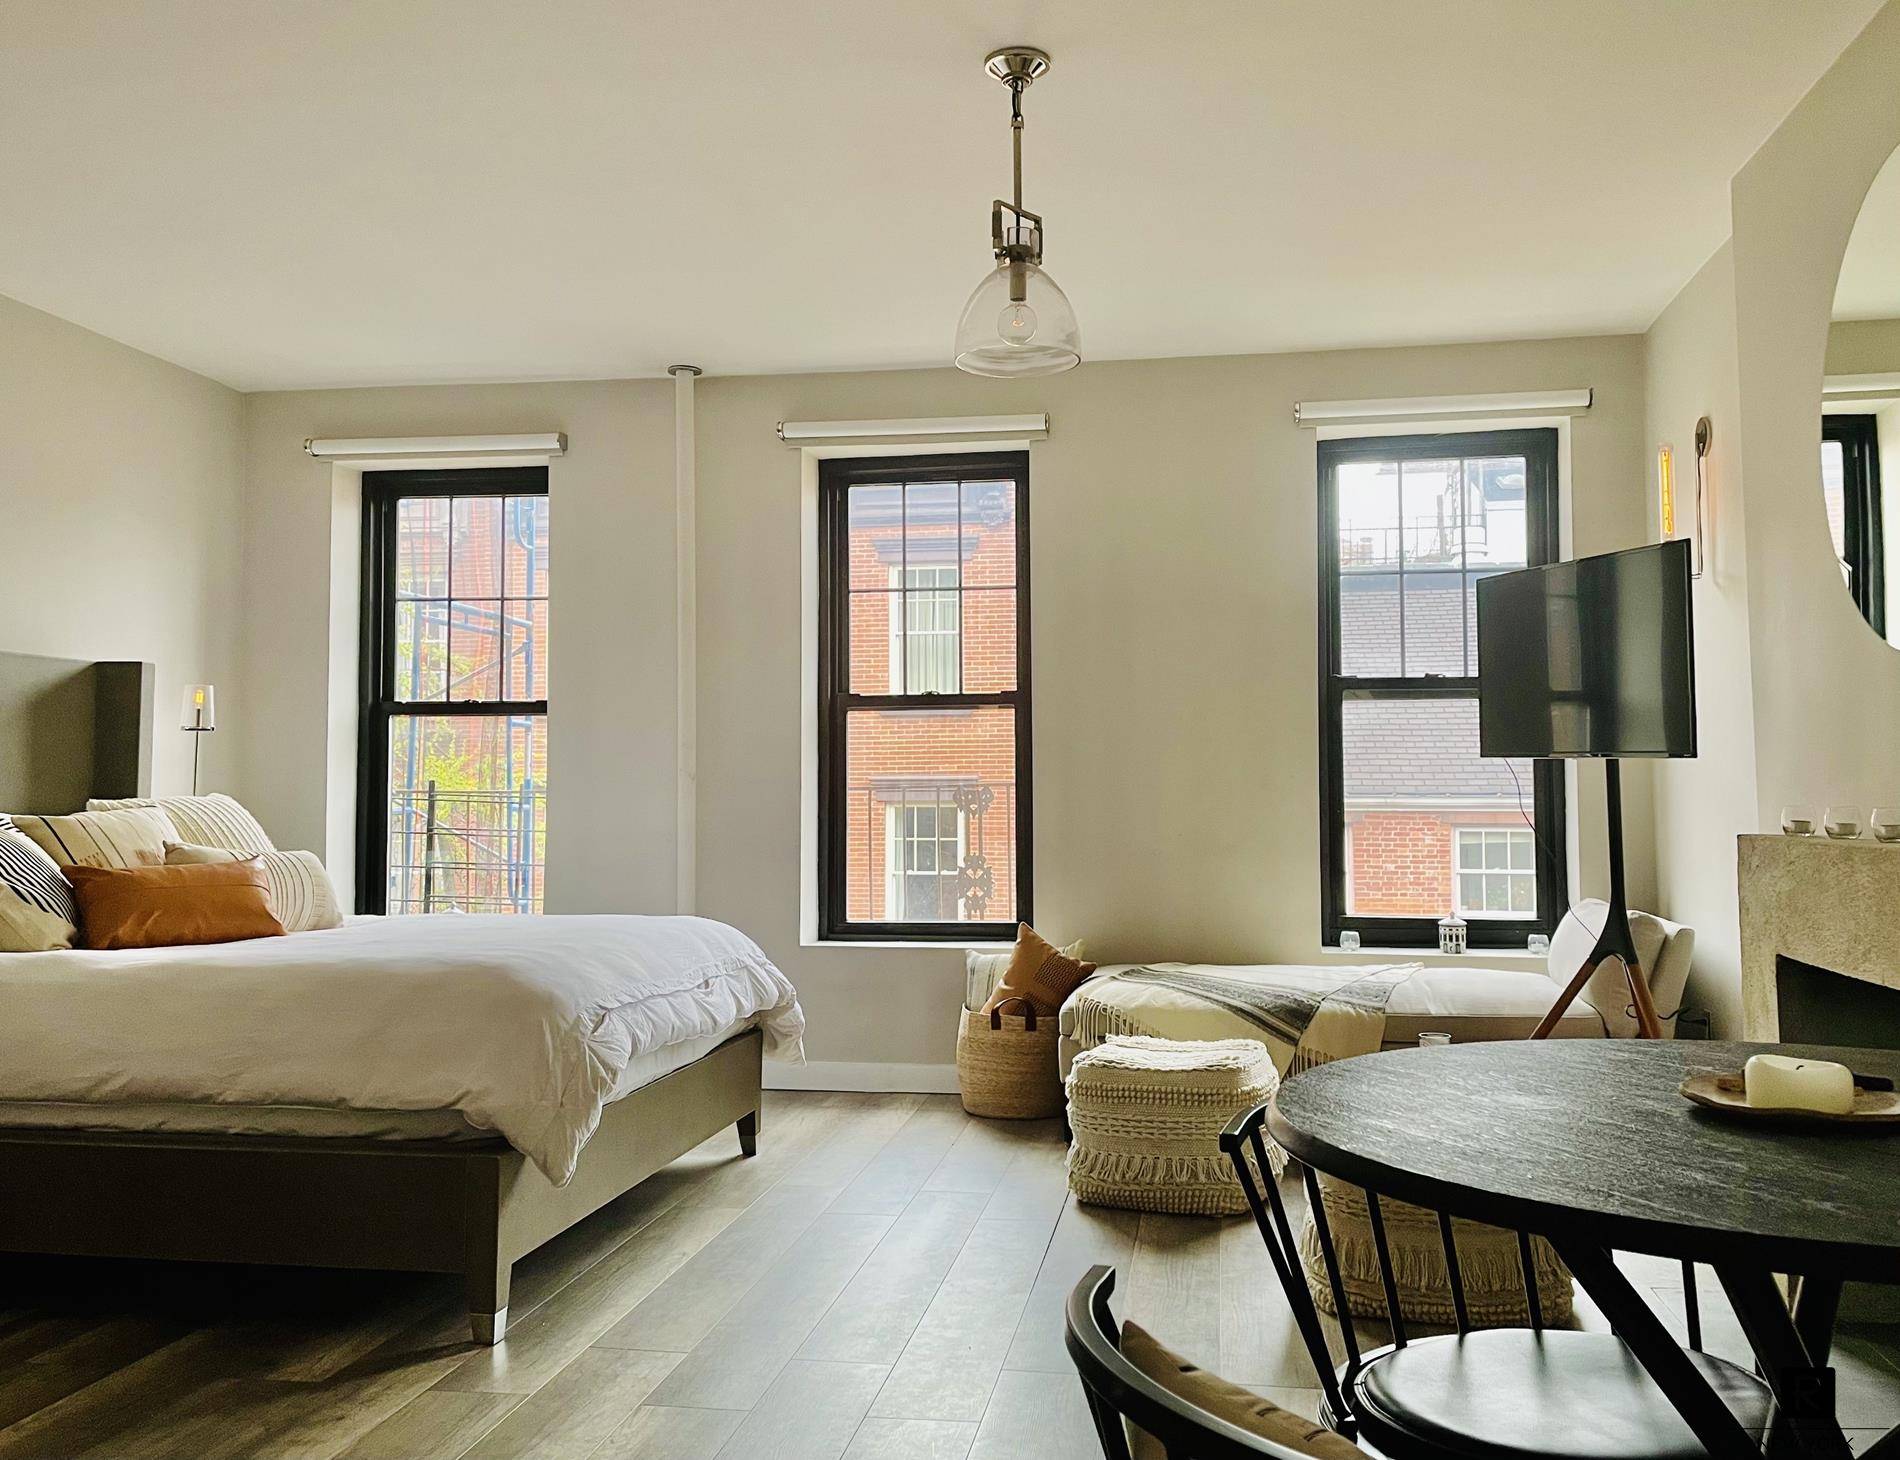 This stunning, large studio was recently renovated with luxurious finishes grey oak floors, warm incandescent light fixtures, a decorative fireplace, and motorized blinds.